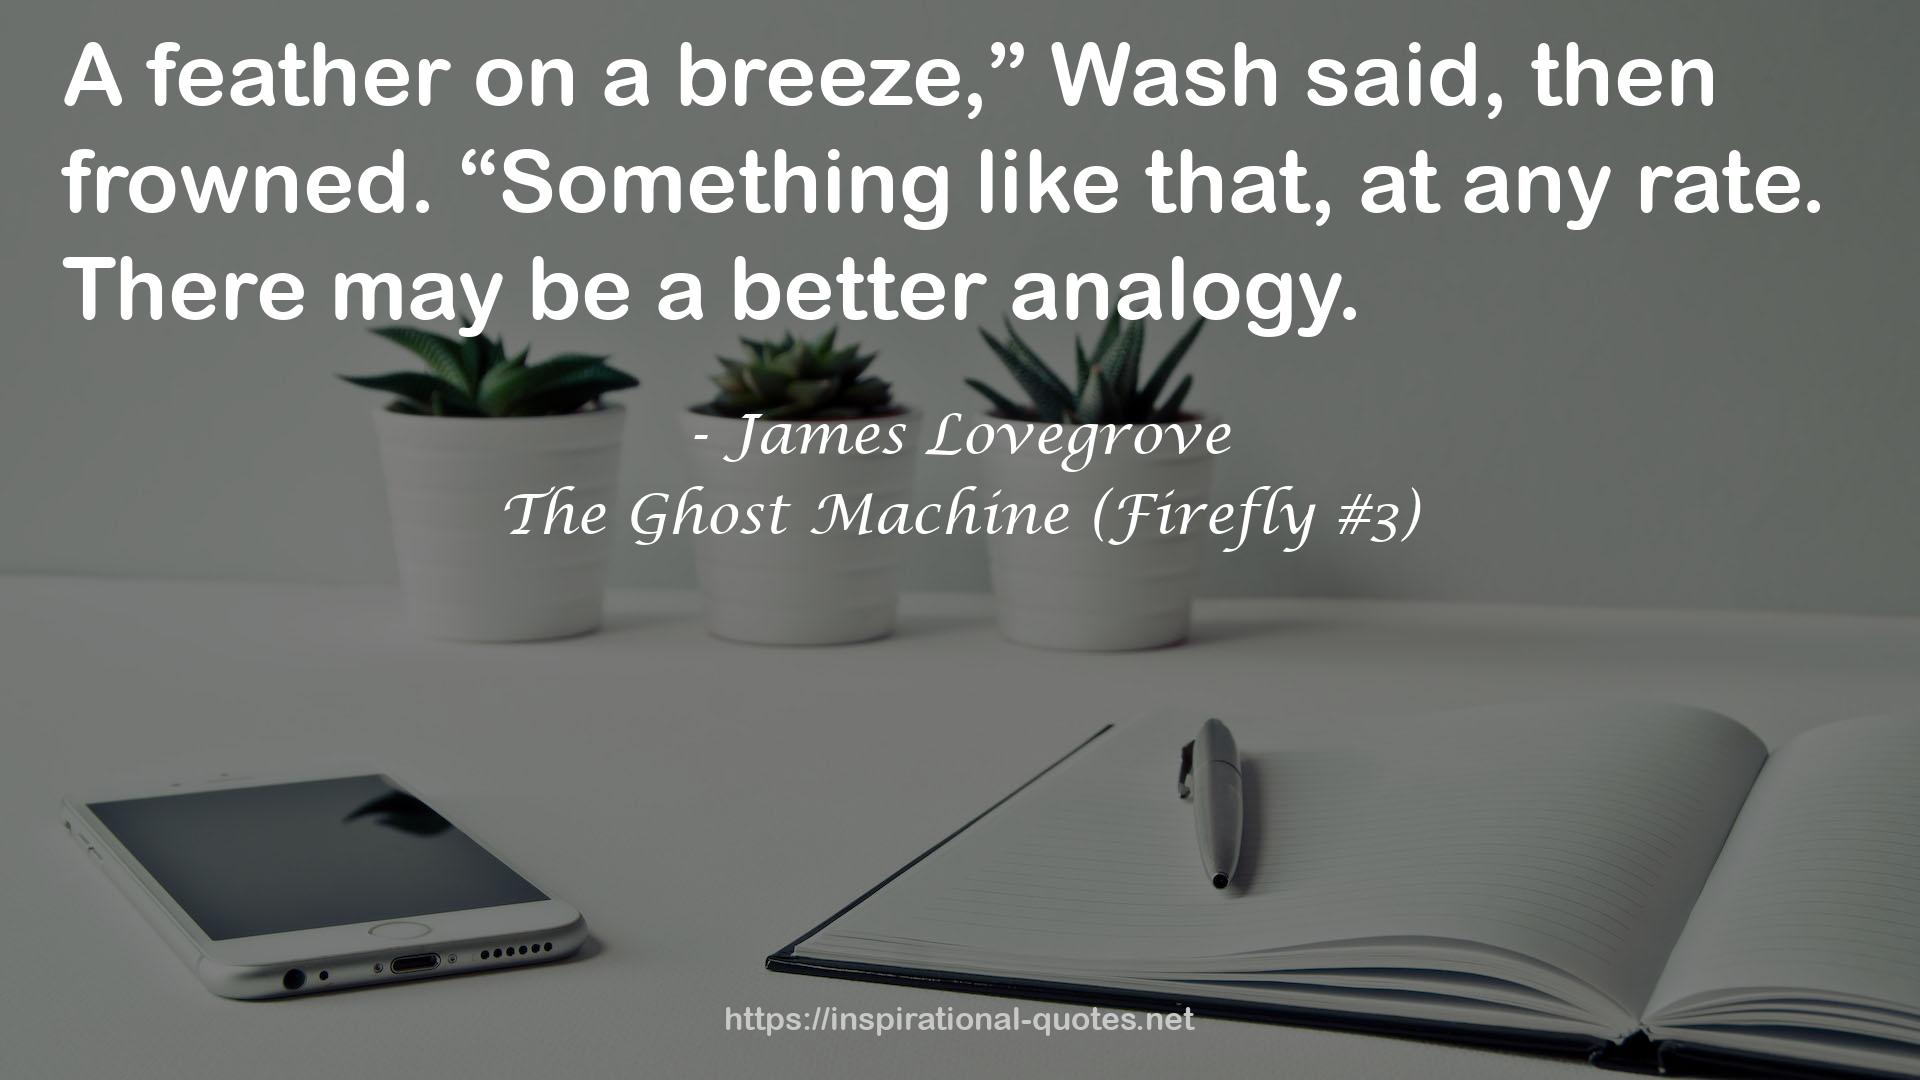 The Ghost Machine (Firefly #3) QUOTES